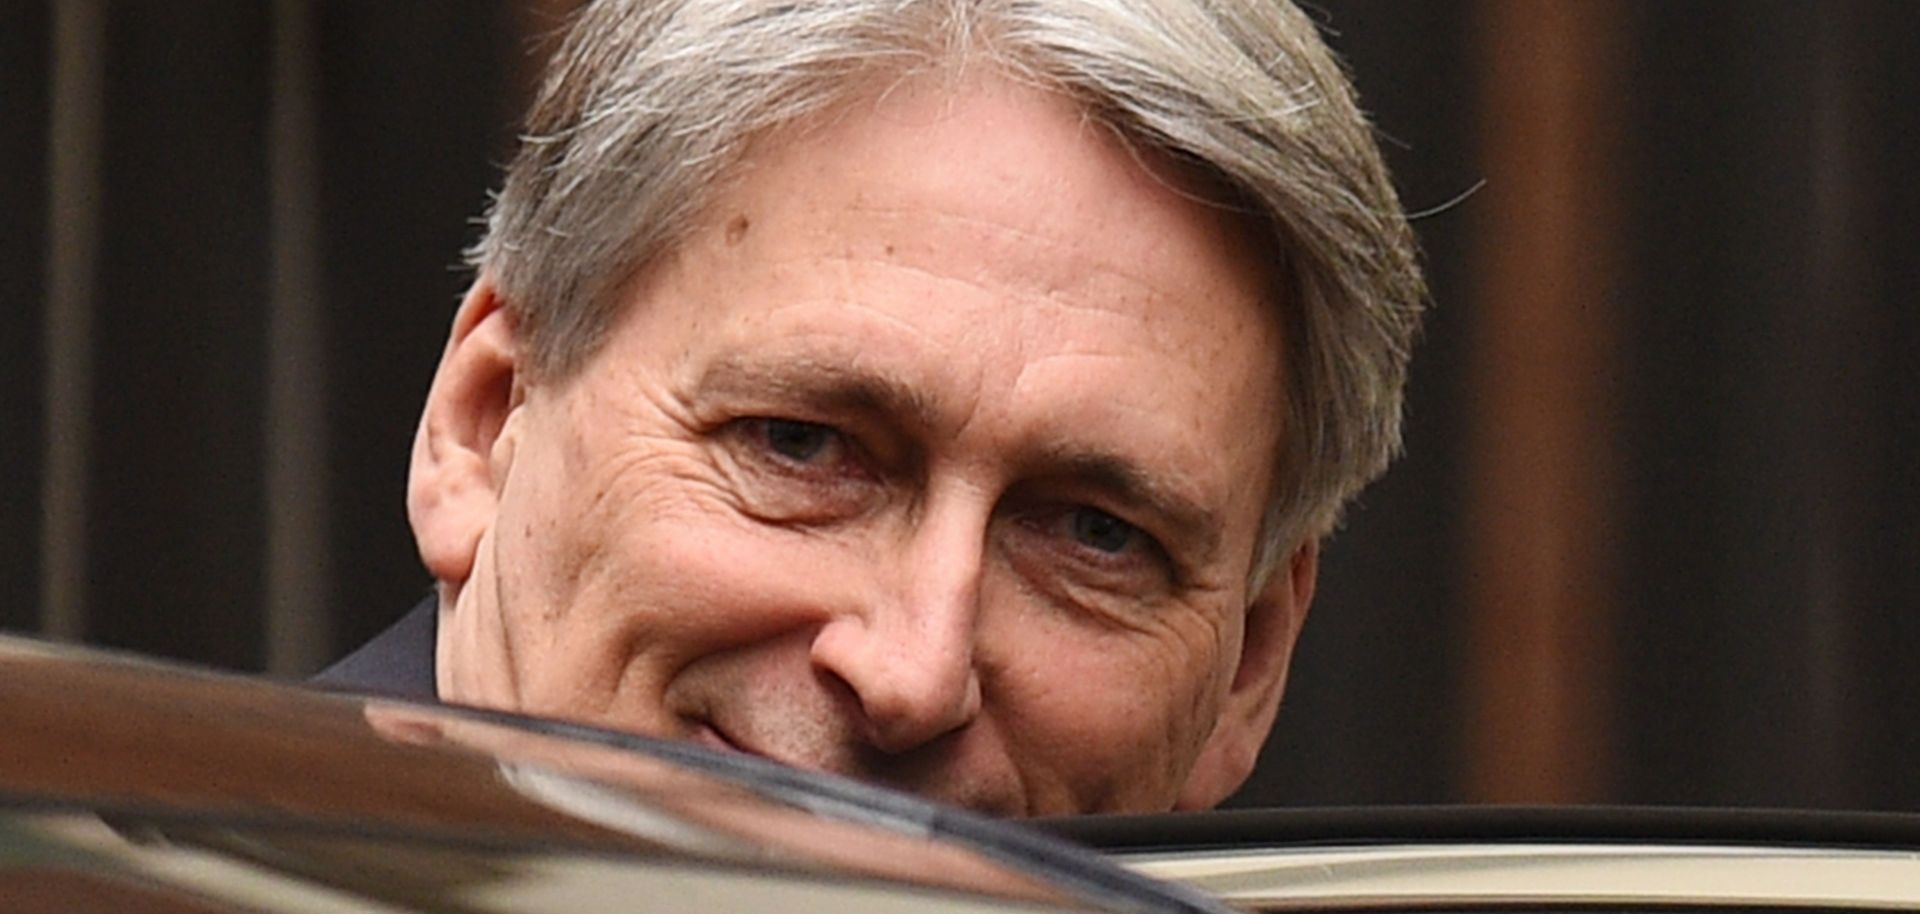 Britain's chancellor of the exchequer, Philip Hammond, heads to the House of Commons in London on Dec. 12, 2018.